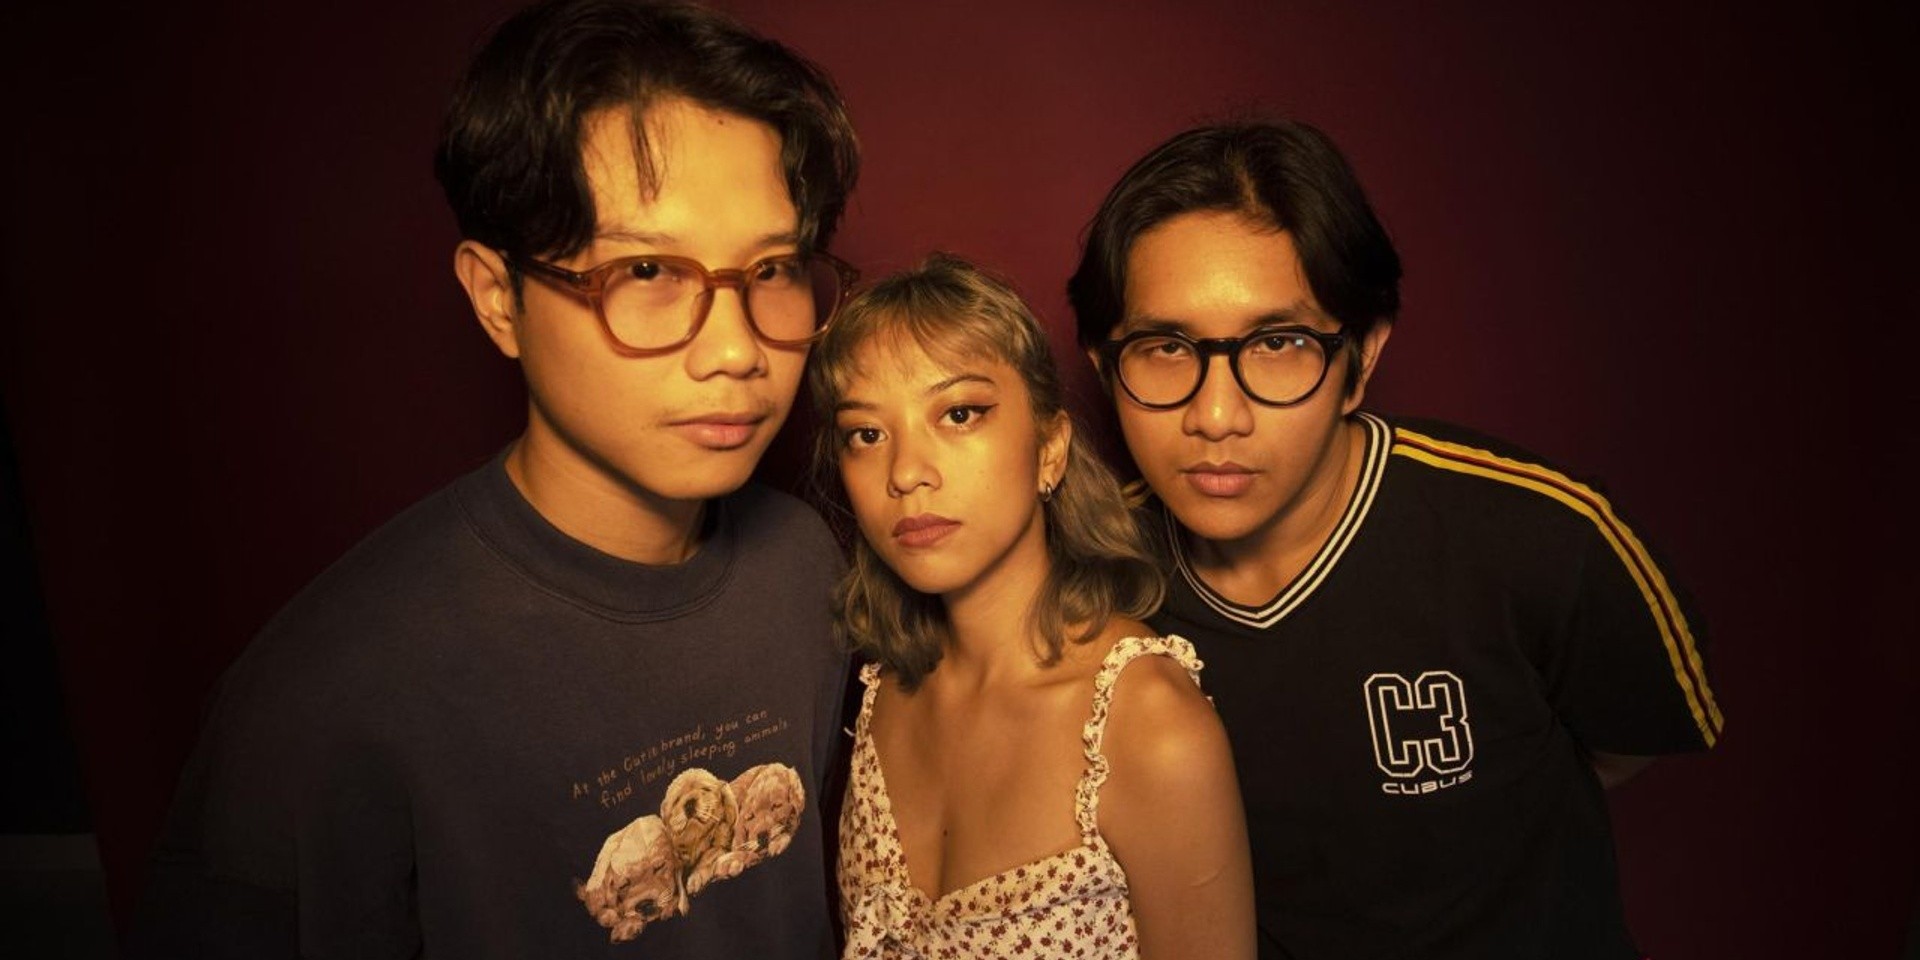 Asia Spotlight: Indonesian trio Grrrl Gang on documenting the highs and lows of youth in their music